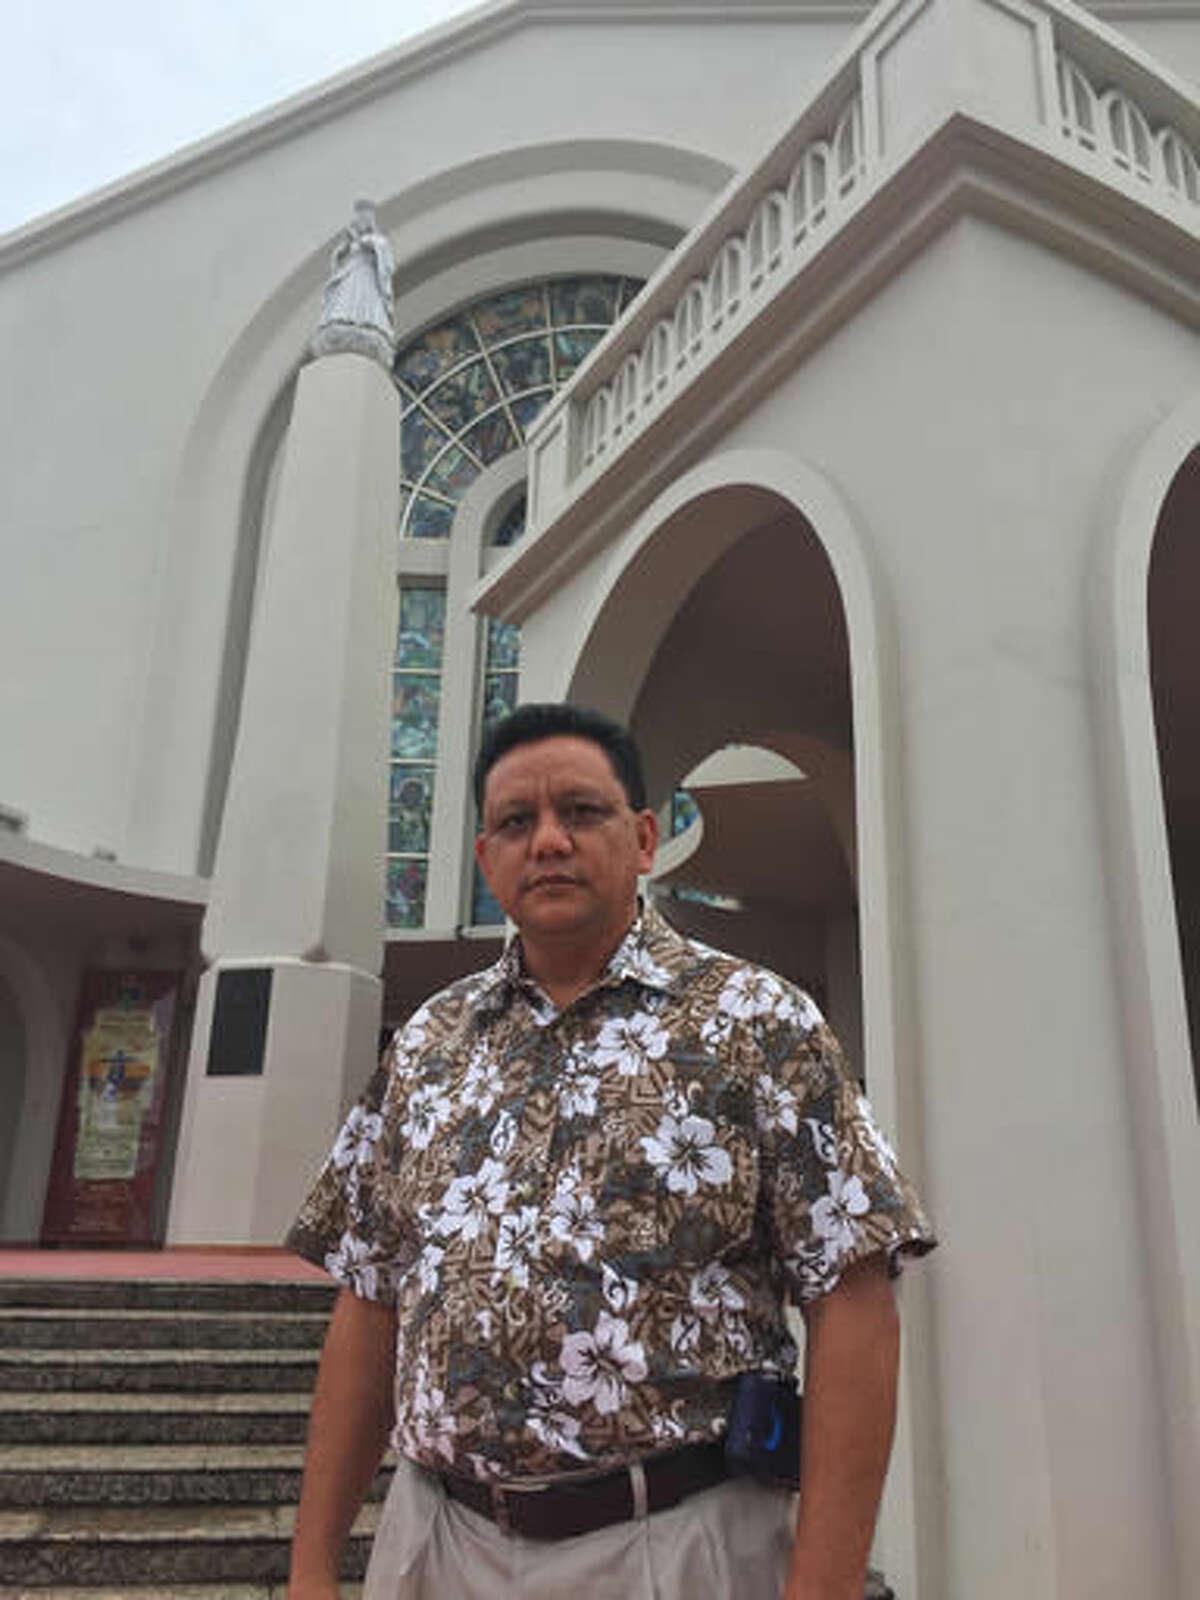 Roland Sondia, 54, stands in front of the Dulce Nombre de Maria Cathedral-Basilica in Hagatna, Guam on Friday, Sept. 23, 2016. Guam Gov. Eddie Calvo said Friday he signed a bill that would lift the statute of limitations on child sex abuse charges for civil cases, a move that Catholic leaders say could bankrupt the church in the largely Catholic U.S. territory. Sondia, who earlier this year publicly accused Archbishop Anthony Apuron of molesting him when he was a 15-year-old altar boy, said he would now file a lawsuit. (AP Photo/Grace Garces Bordallo)